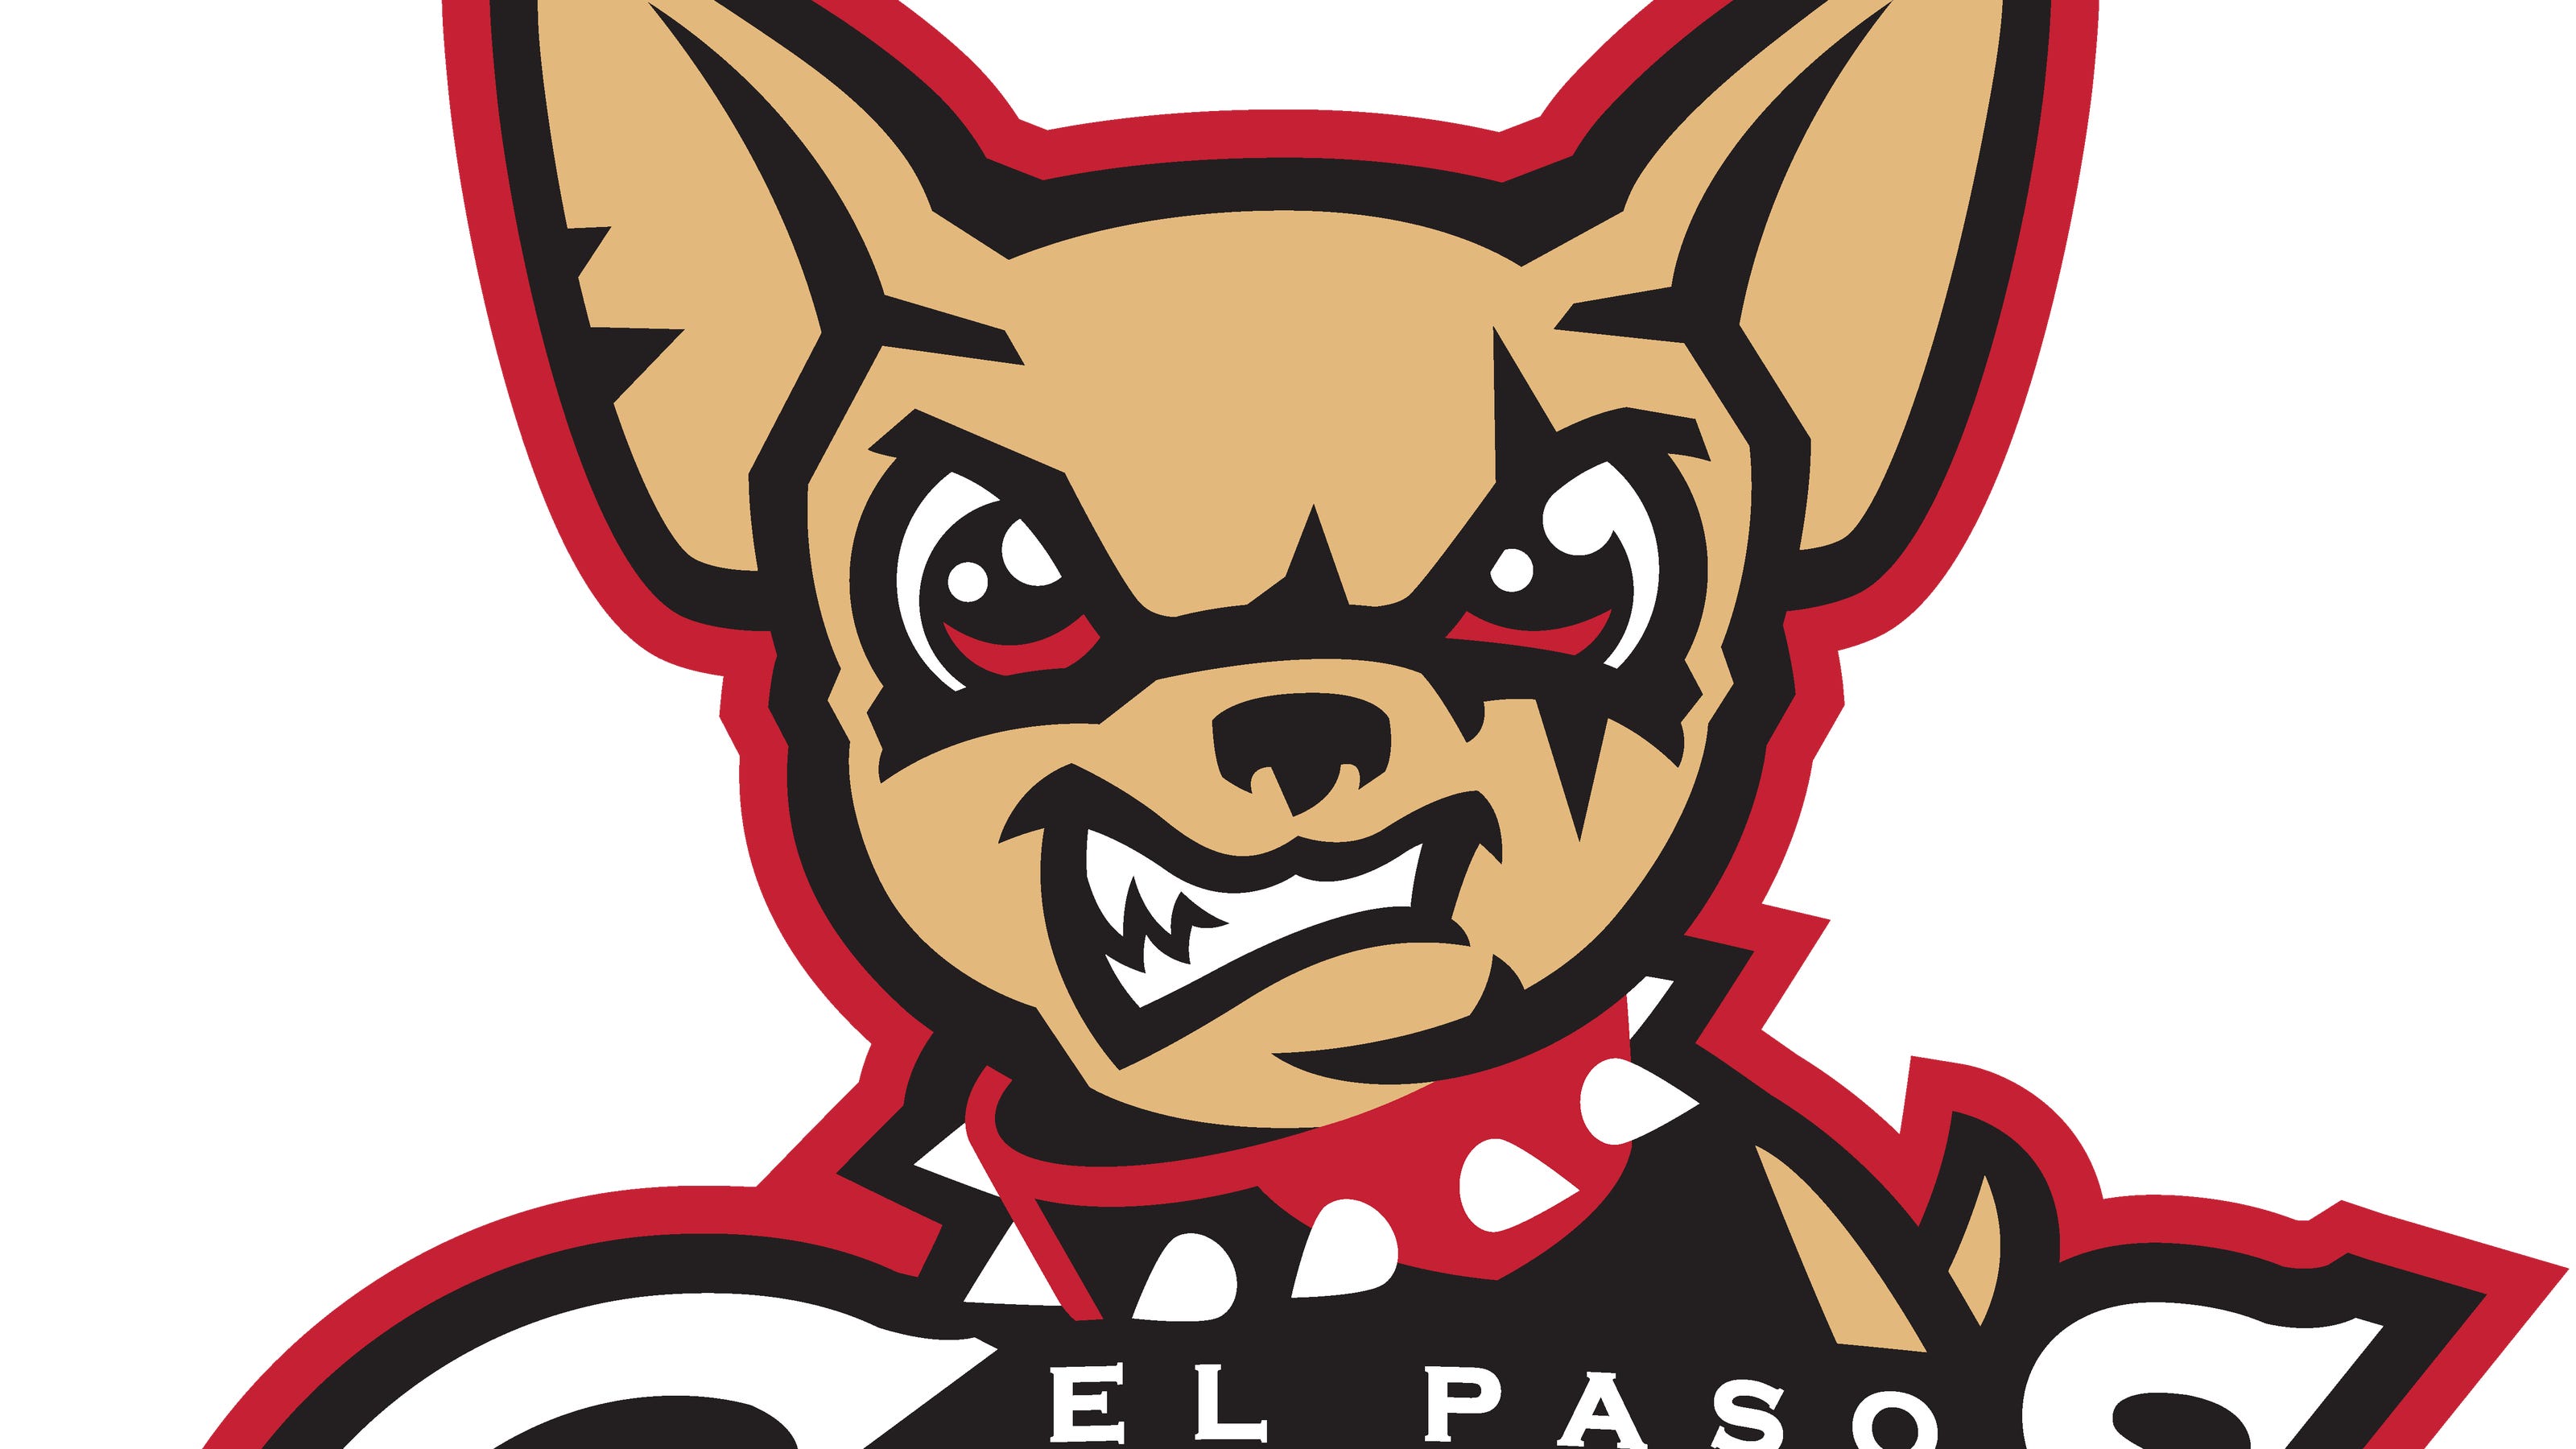 El Paso Chihuahuas season-opener pushed back one month to May 6